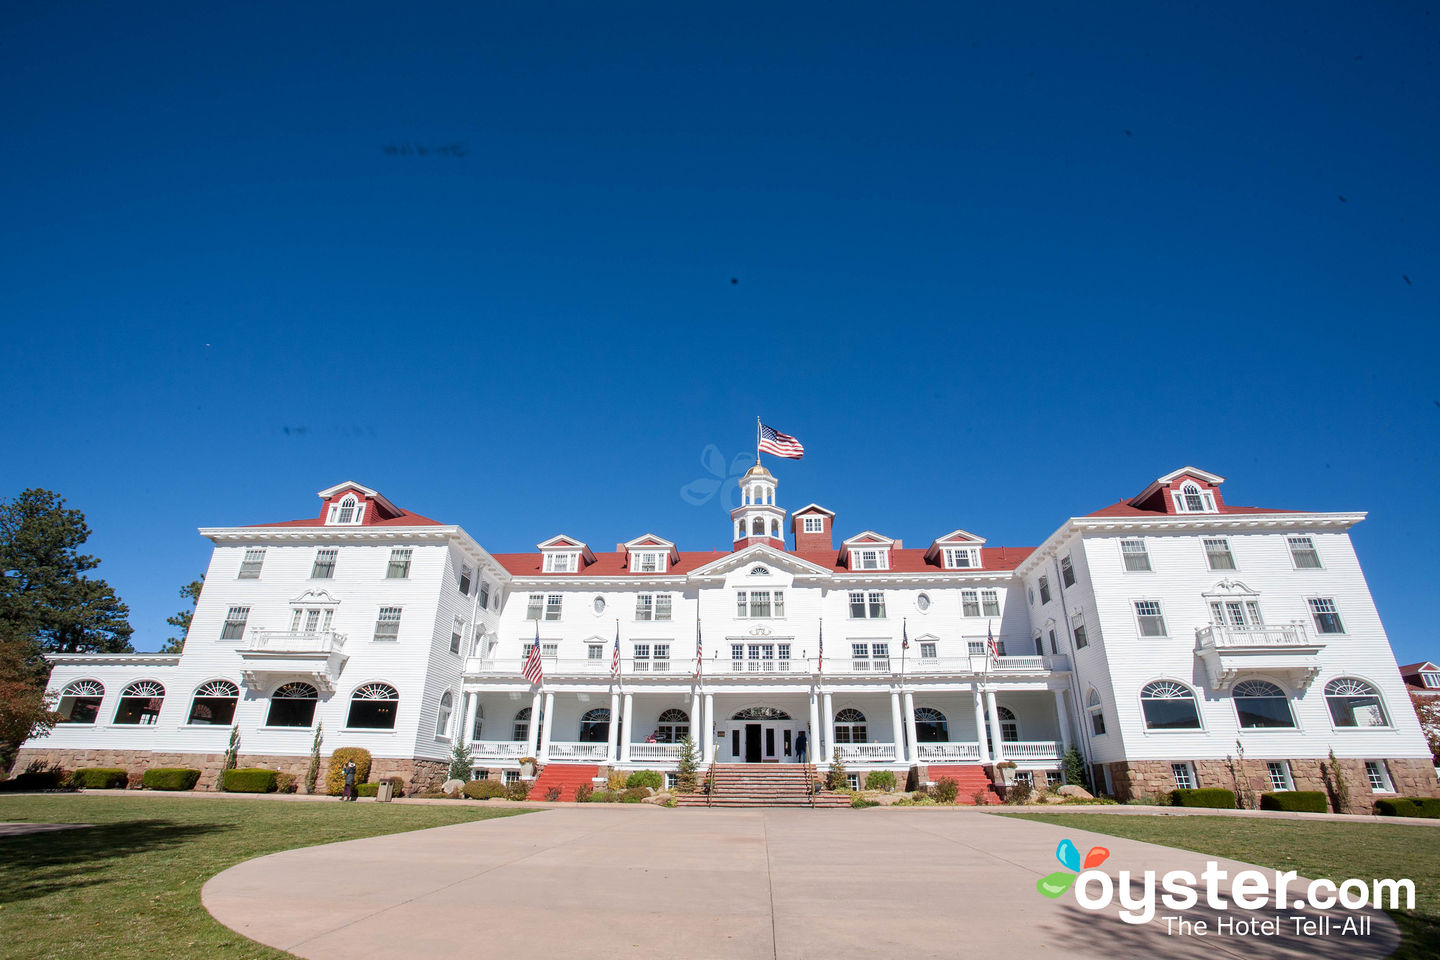 The pool and Jacuzzi at The Aspire are - The Stanley Hotel